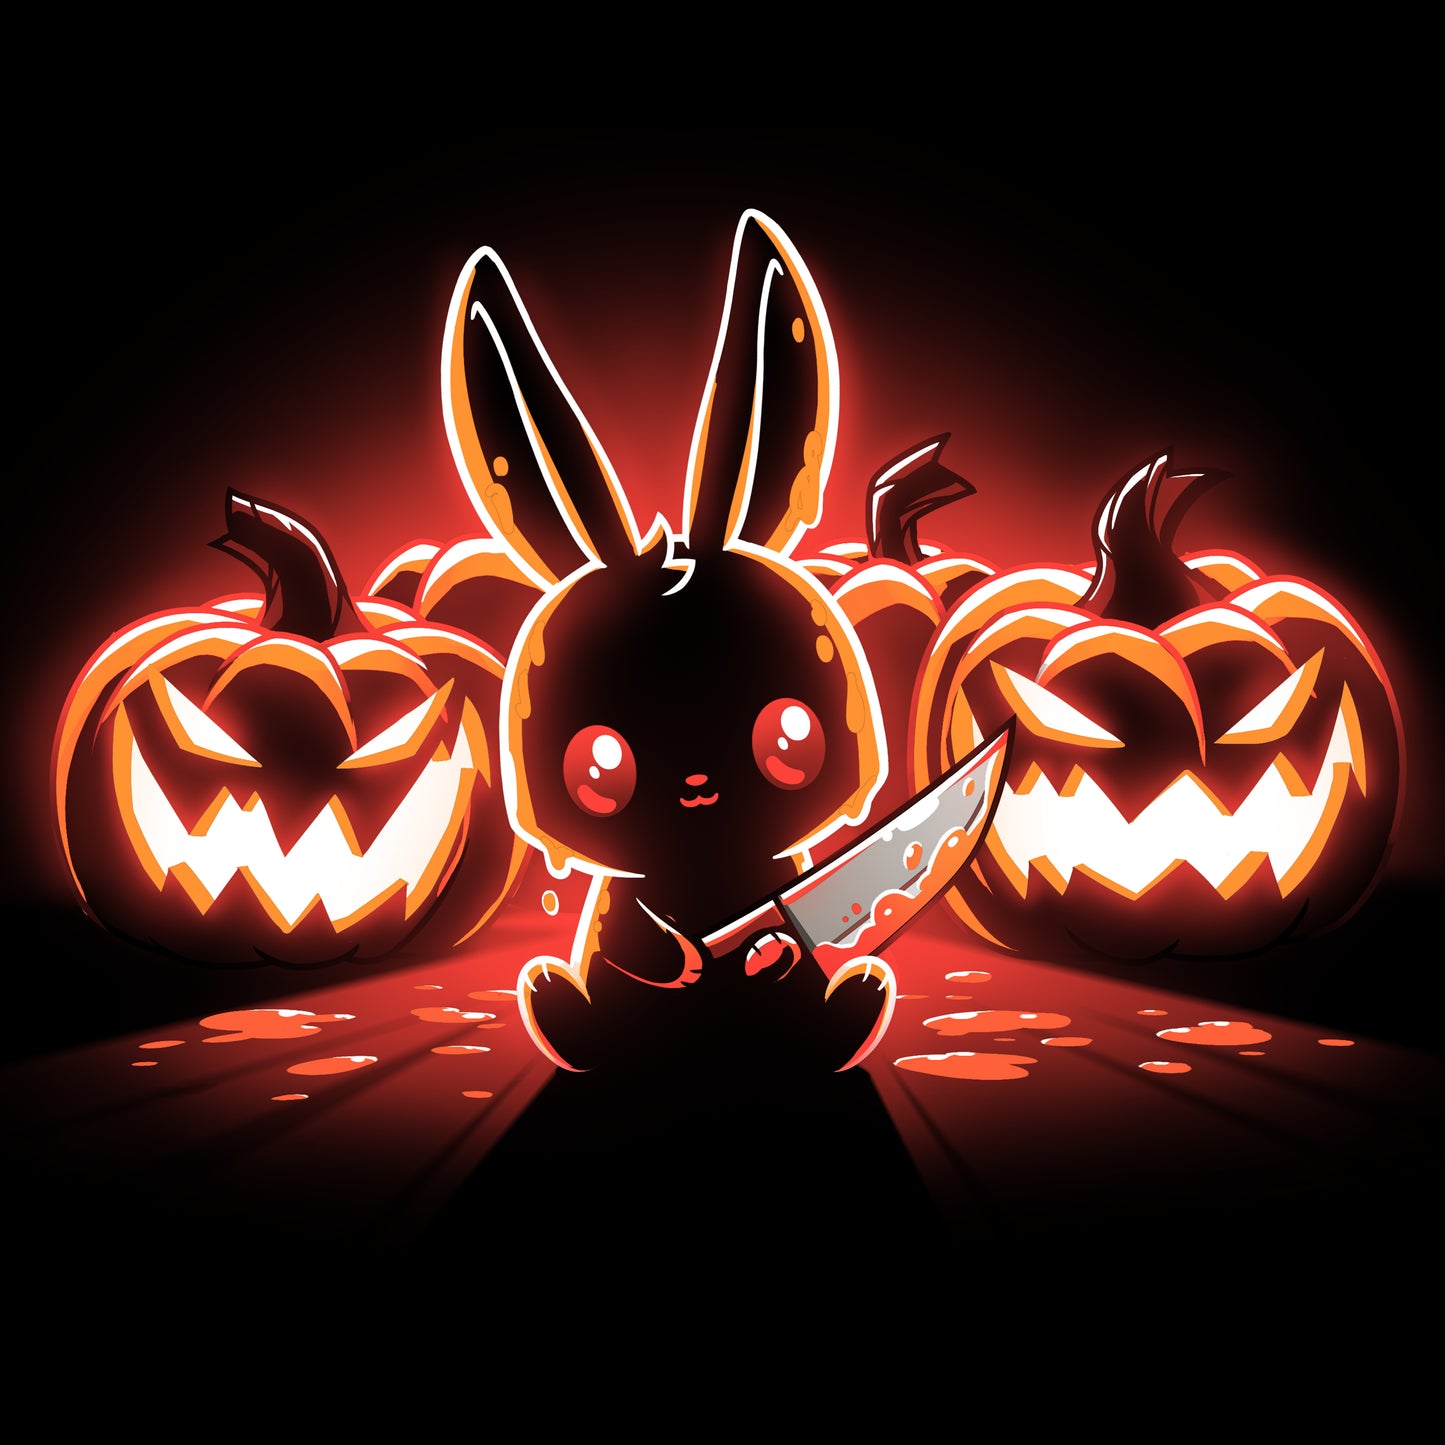 A Pumpkin Murderer bunny with a knife, perfect for a TeeTurtle t-shirt.